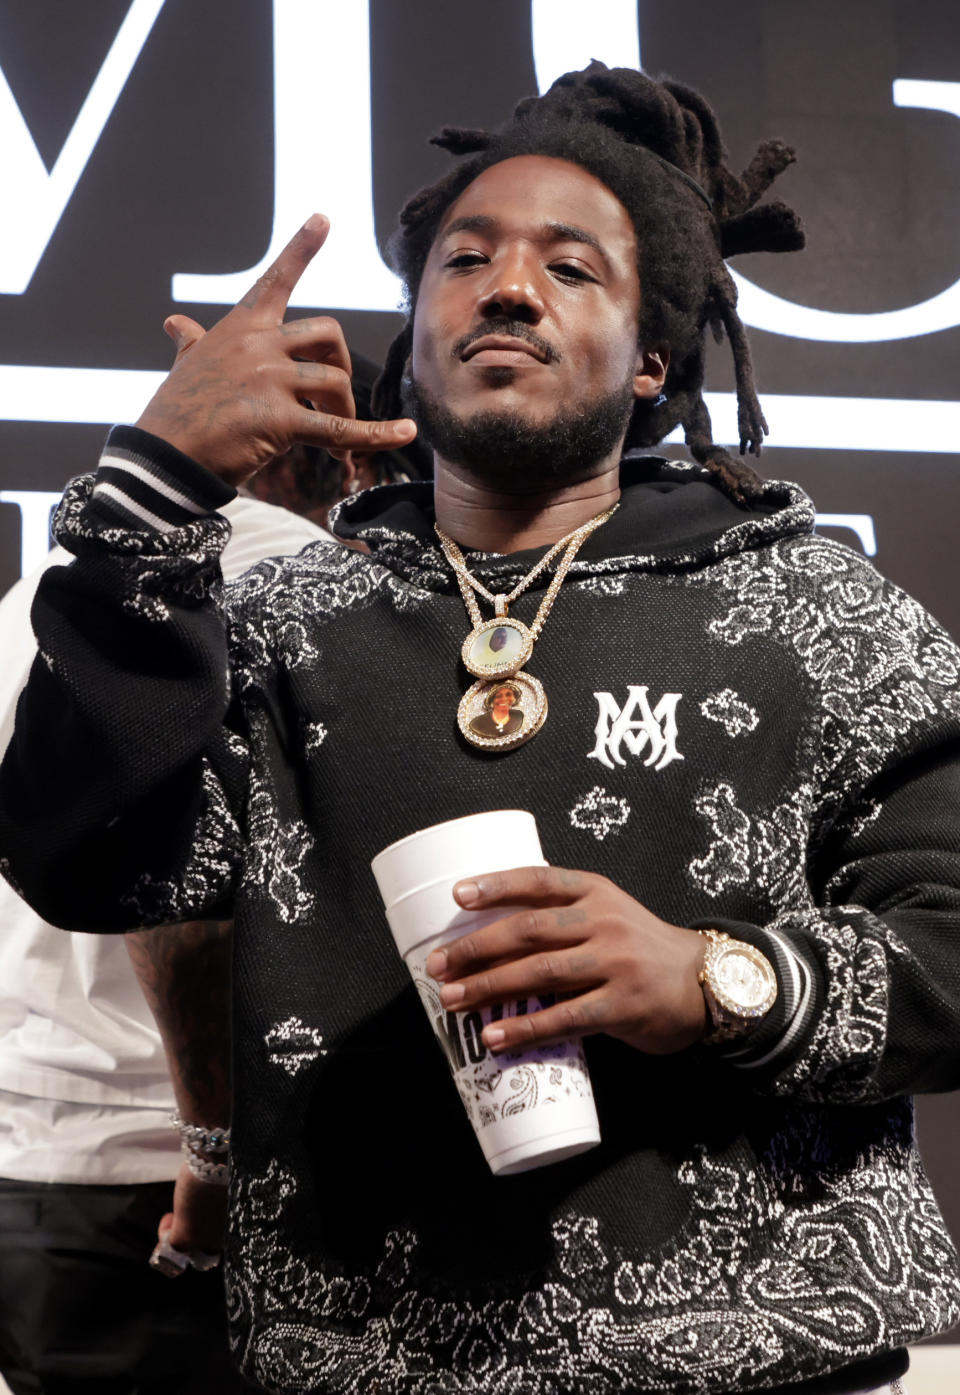 LOS ANGELES, CALIFORNIA – FEBRUARY 10: Mozzy attends the Yo Gotti’s CMG 2022 Press Conference on February 10, 2022 in Los Angeles, California. (Photo by Frazer Harrison/Getty Images)